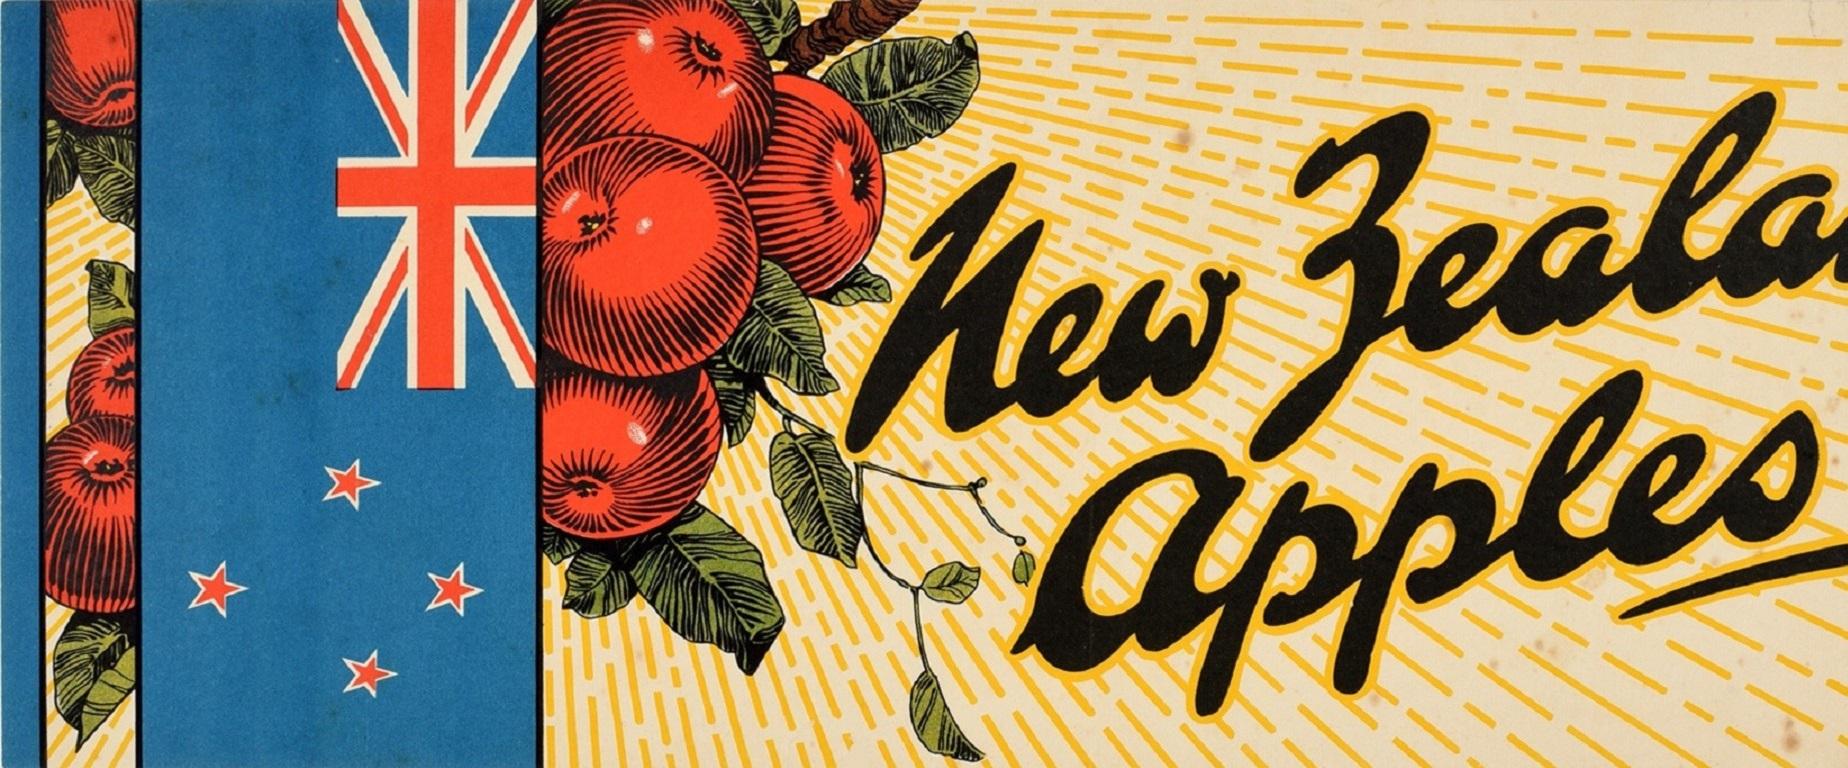 Original vintage food advertising poster for New Zealand Apples featuring a colourful design showing fresh red apples on the branch of a tree behind the New Zealand flag with sunshine radiating forward from the fruit in the background, the stylised